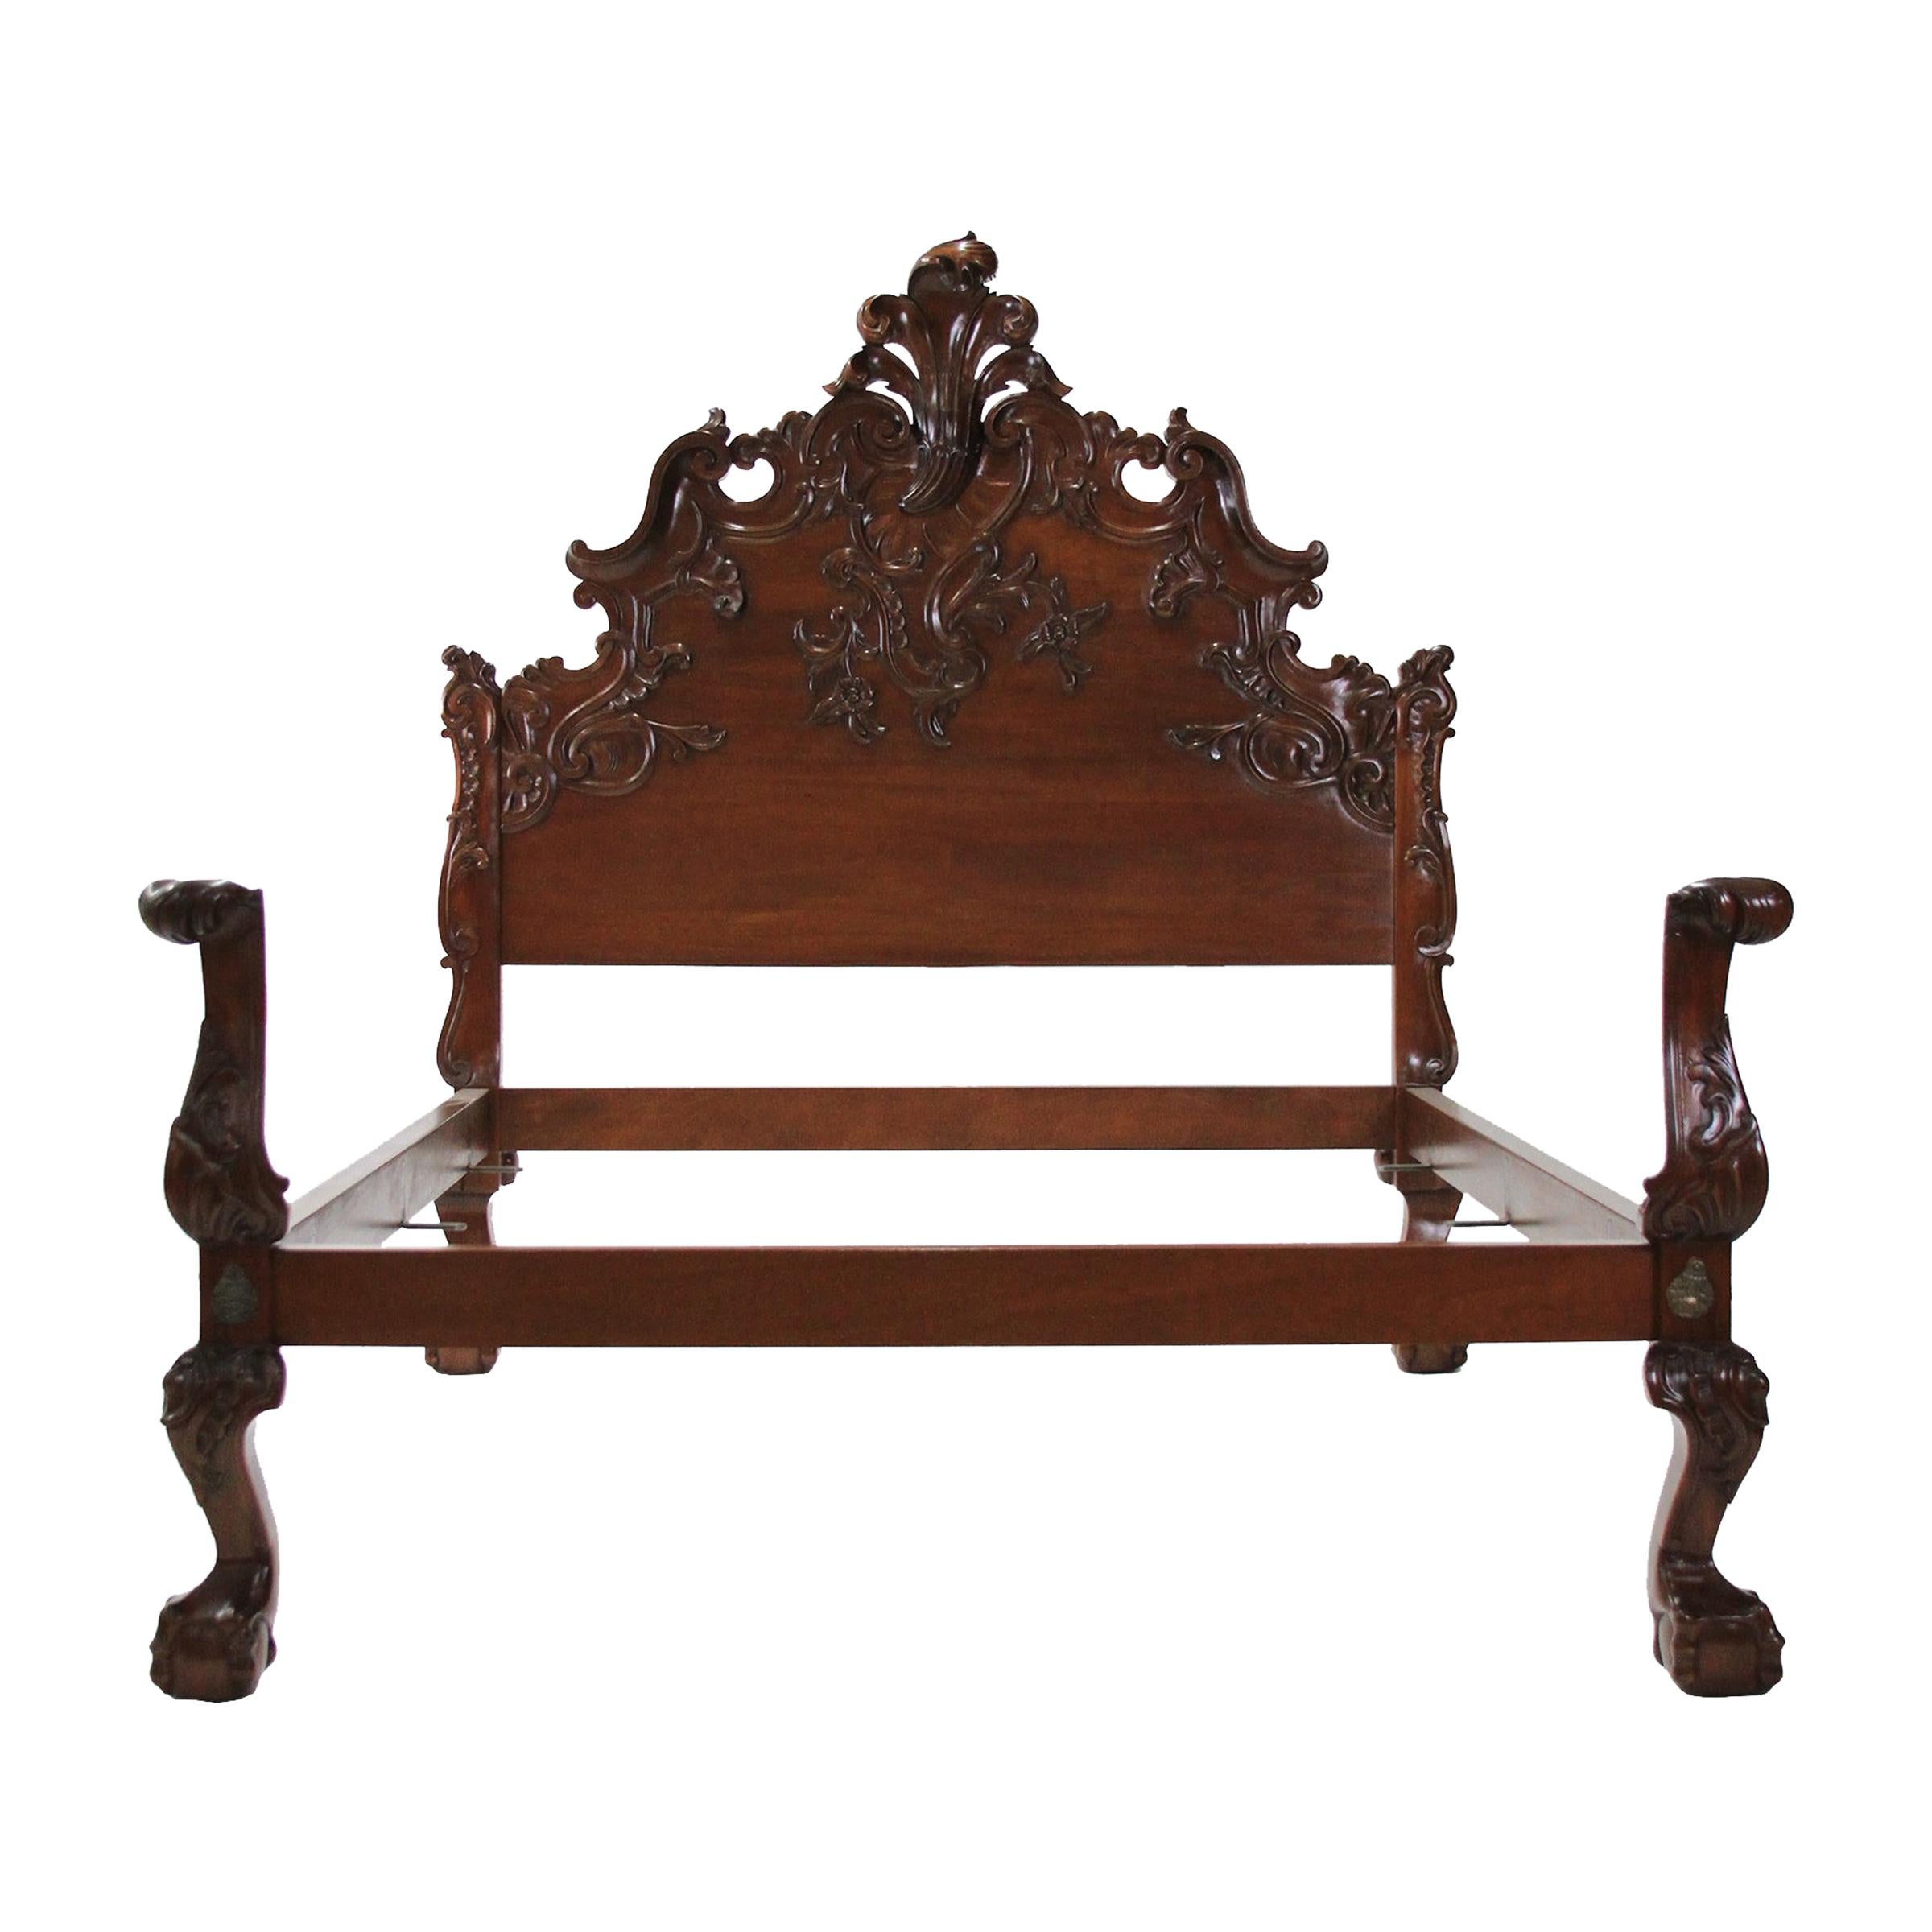 King Solid Mahogany Hand Carved Spanish Rococo Style Bed with Ball & Claw Foot For Sale